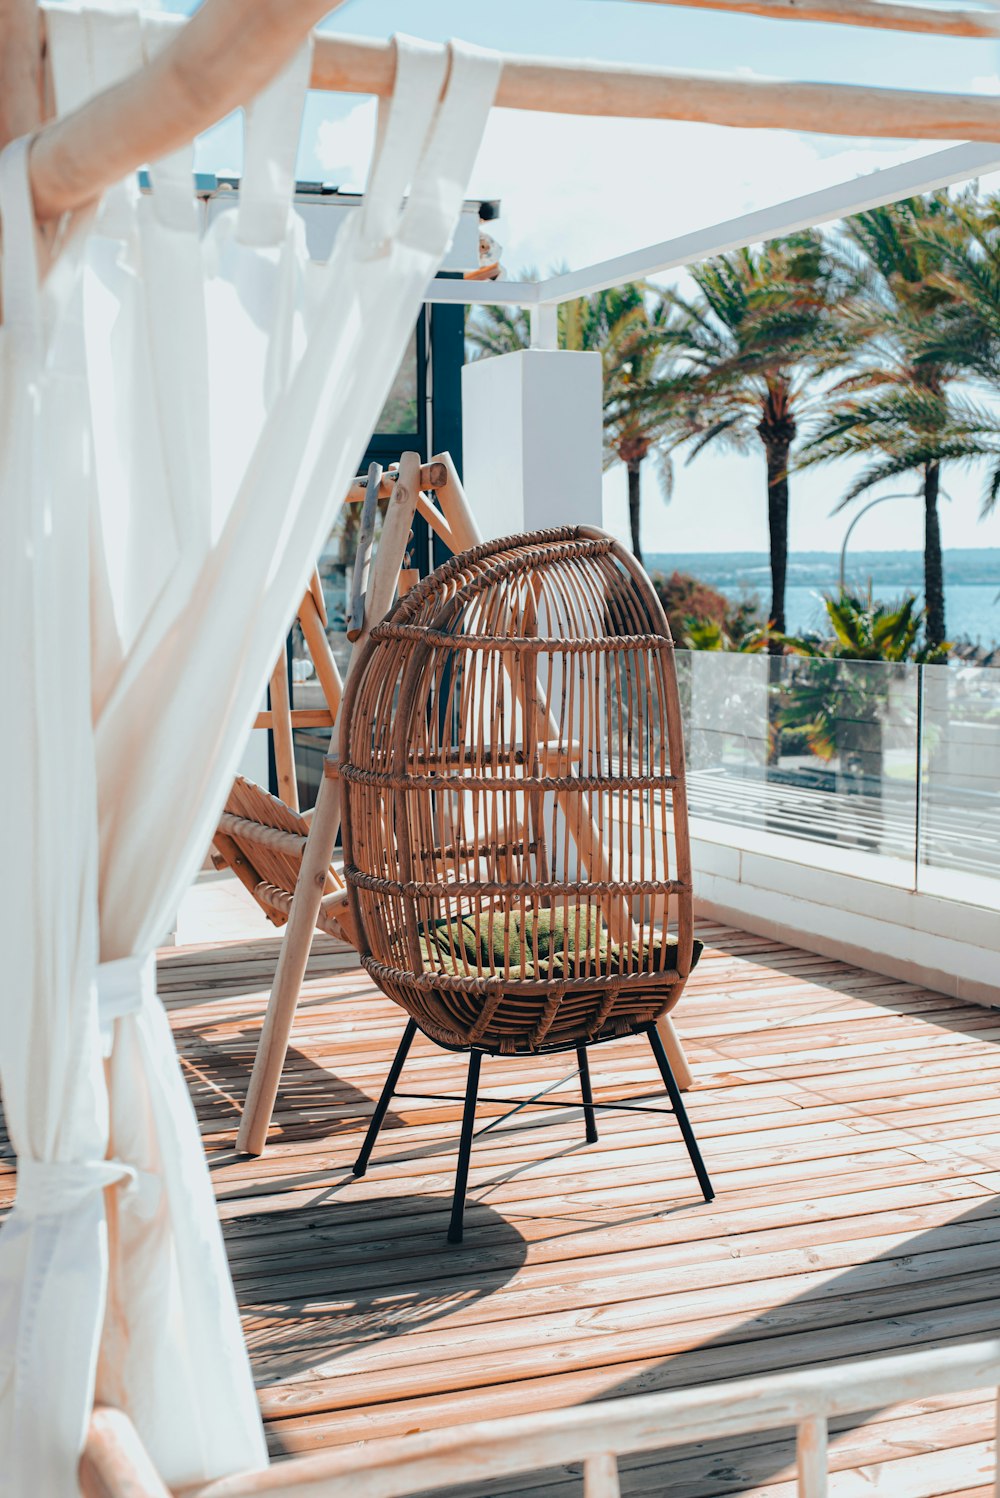 a wicker chair sitting on a wooden deck